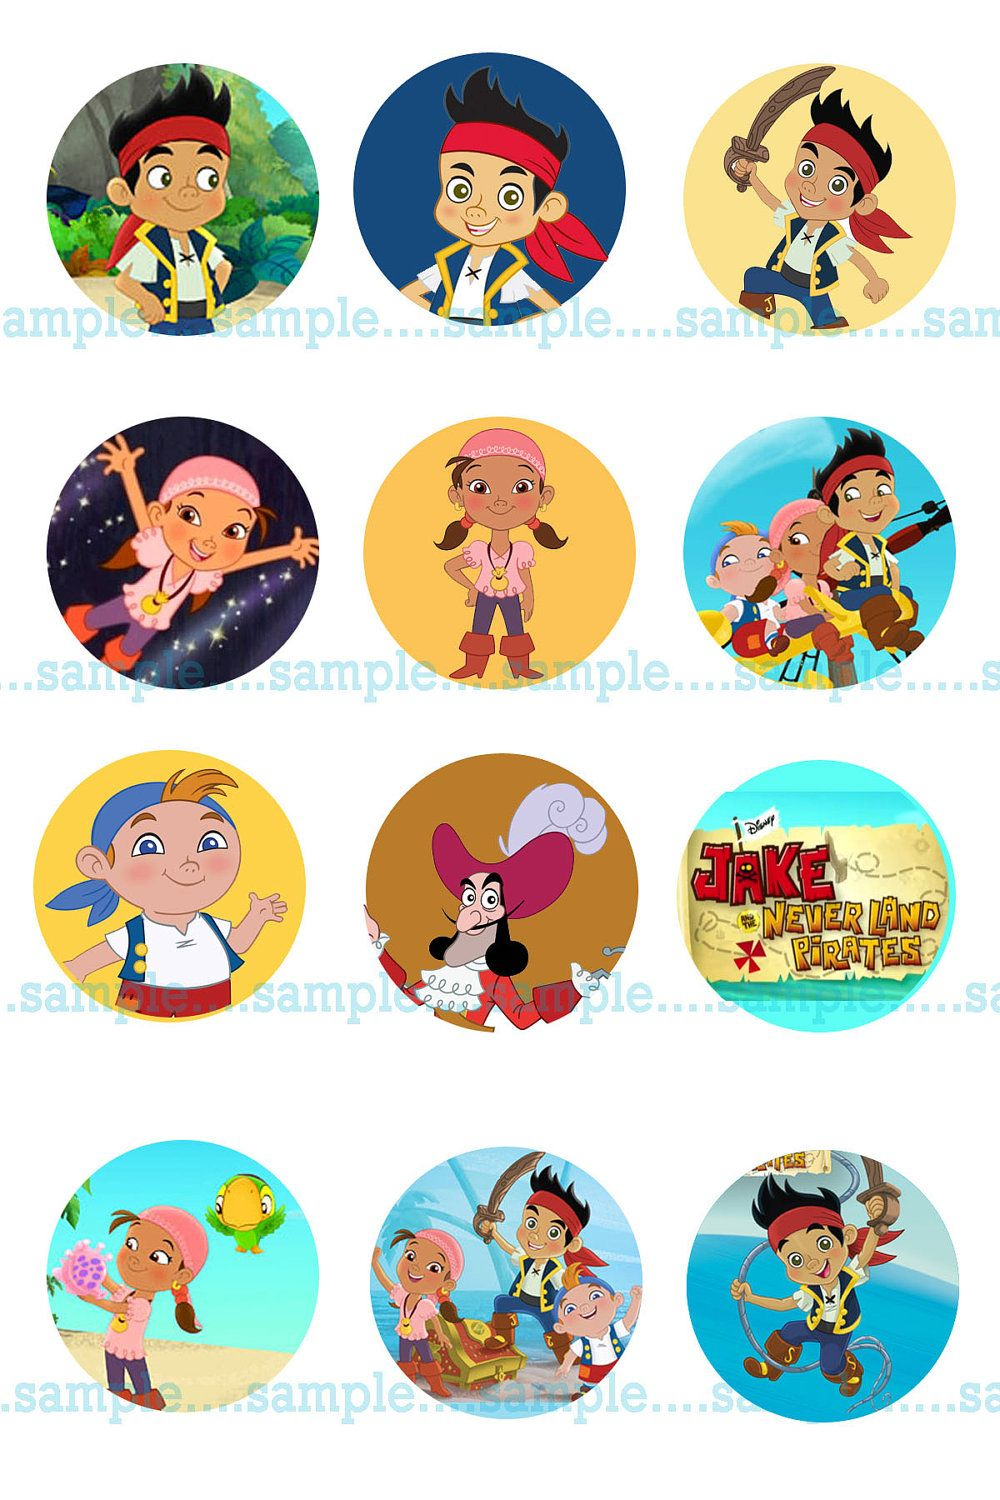 Pinkristen Williams On Birthday Party | Pinterest | Neverland - Free Printable Jake And The Neverland Pirates Cupcake Toppers